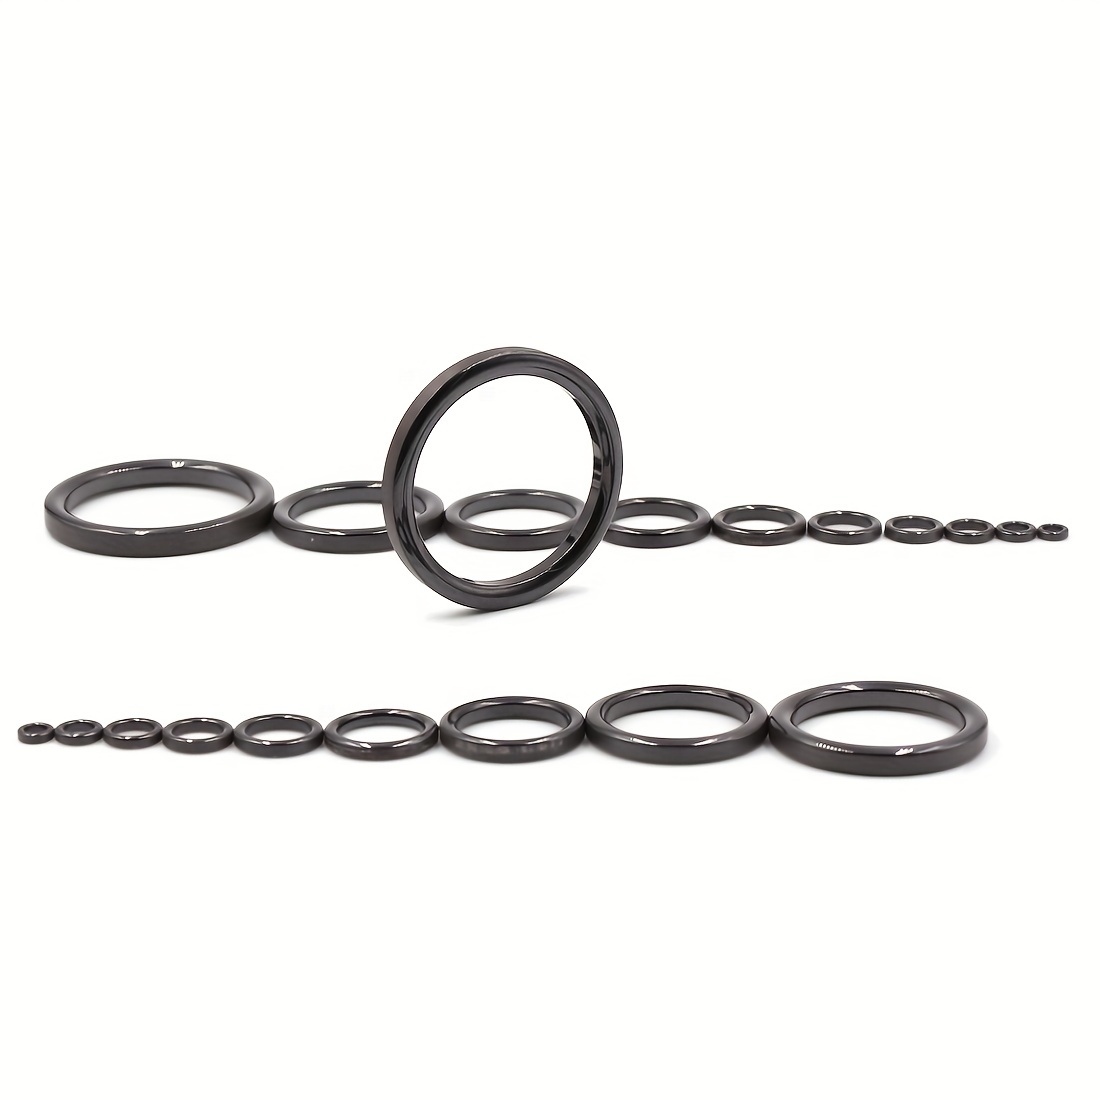 Fishing Rod Guide Ring Set, Including Rock Fishing Rod Guide Ring